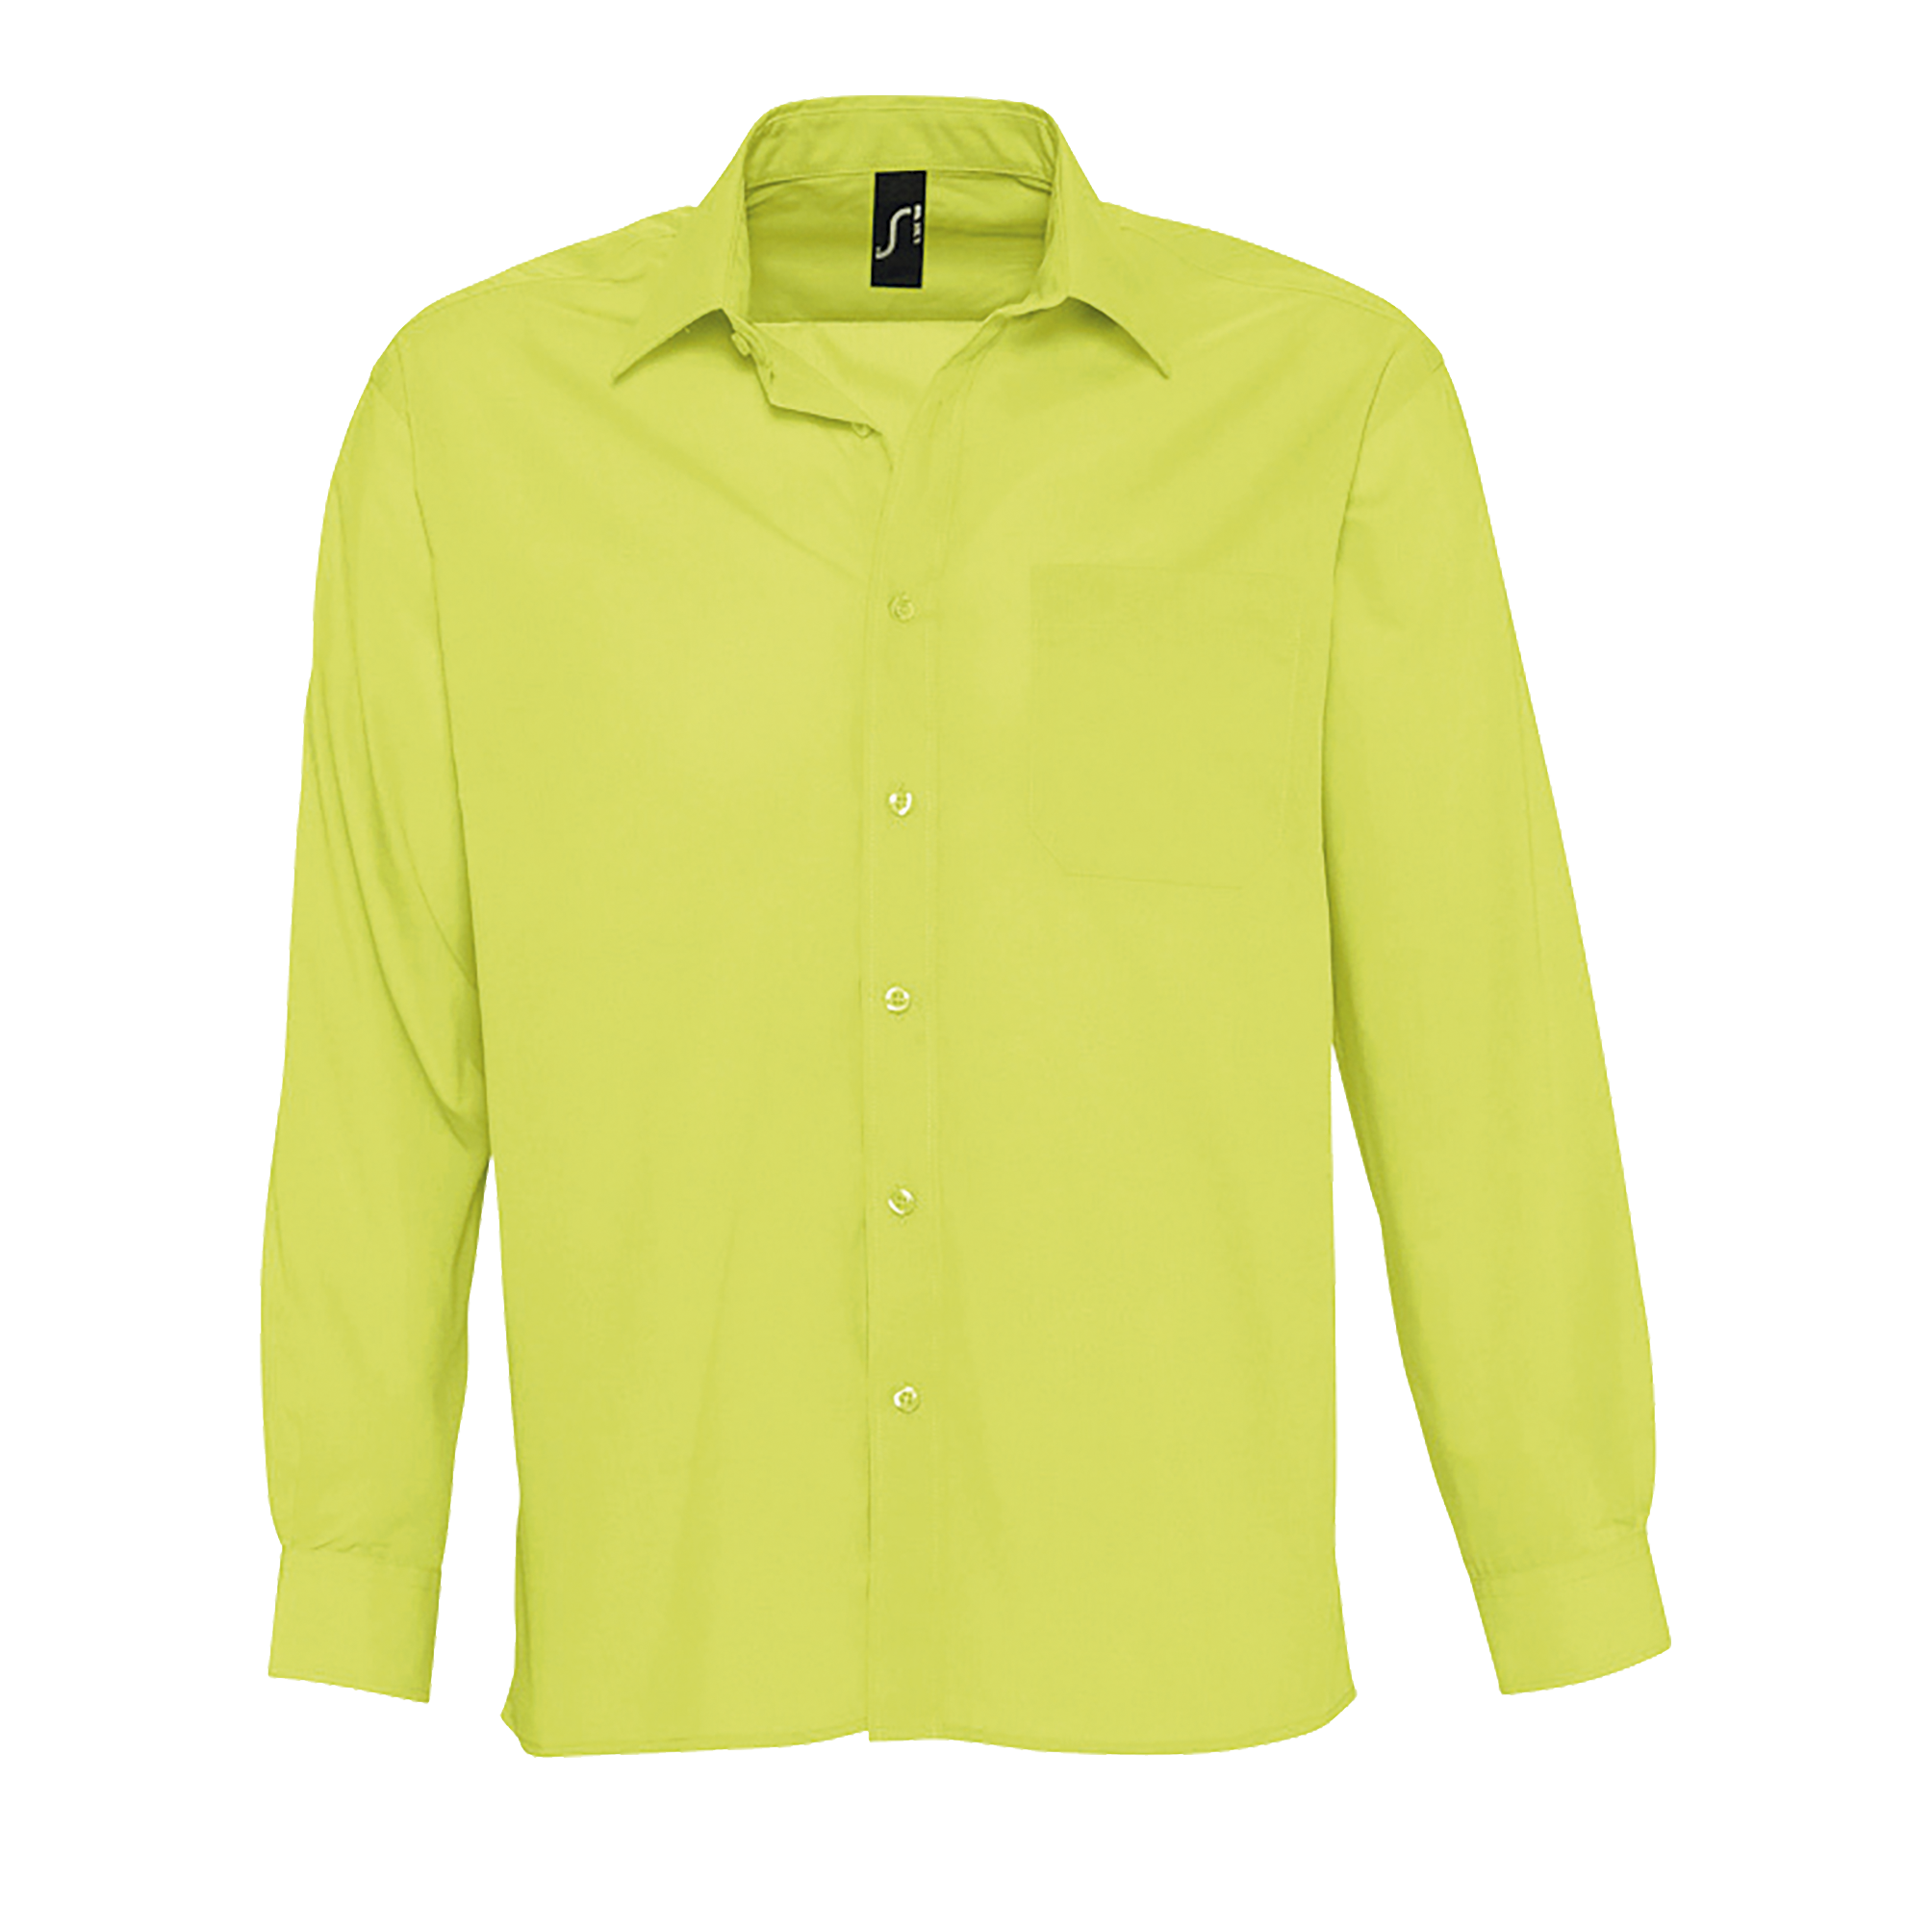 images/stories/virtuemart/sols20/199_chemise_homme_popeline_manches_longues_baltimore_apple_green_face